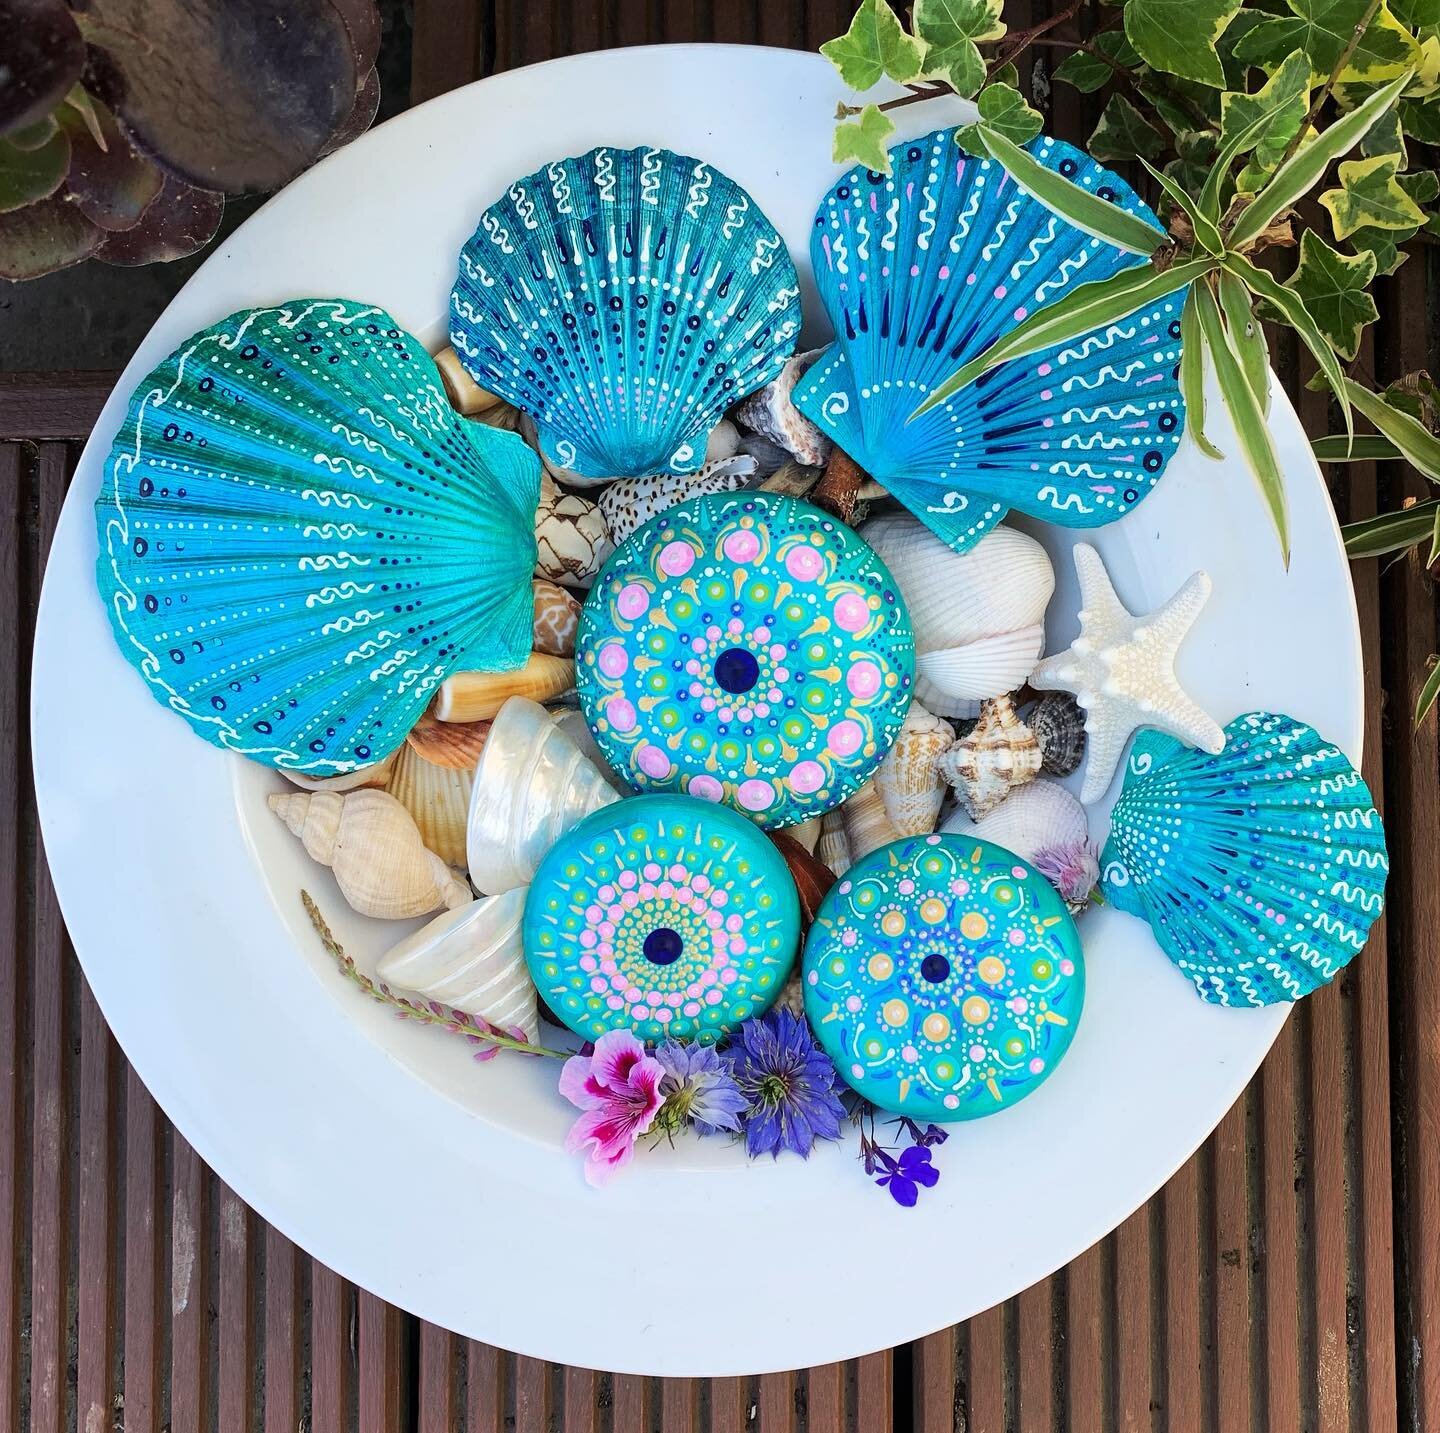 Happy Friday from a rainy Jersey , here&rsquo;s a plate full of Turquoise to brighten the day . Have a good one whatever you&rsquo;re up to 😀